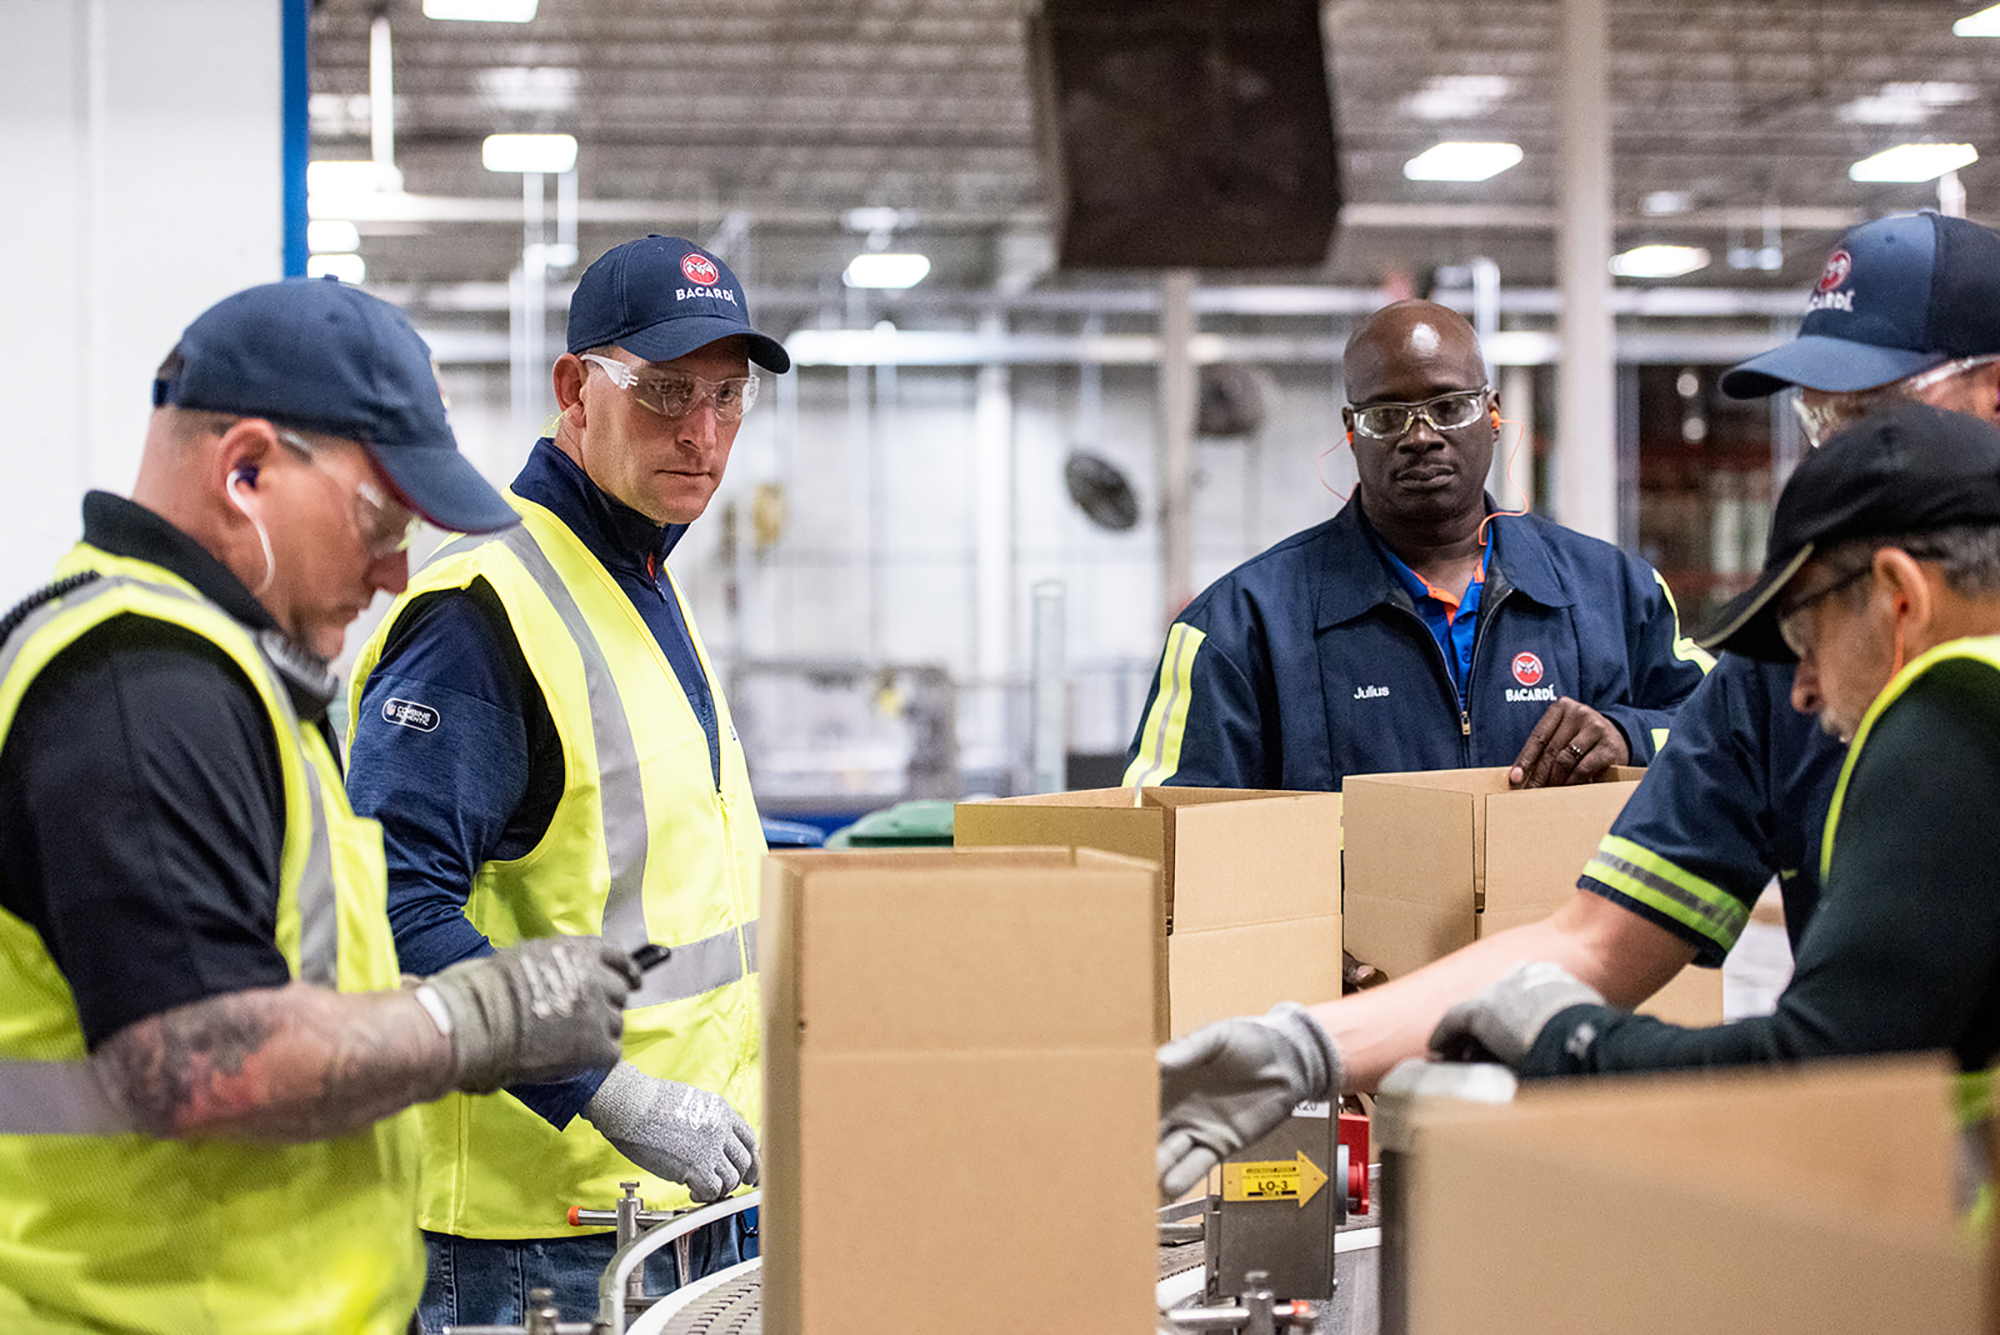 Darrin Mueller, second from left, leads 200 workers at the Jacksonville Bacardi plant. (Provided by Bacardi)